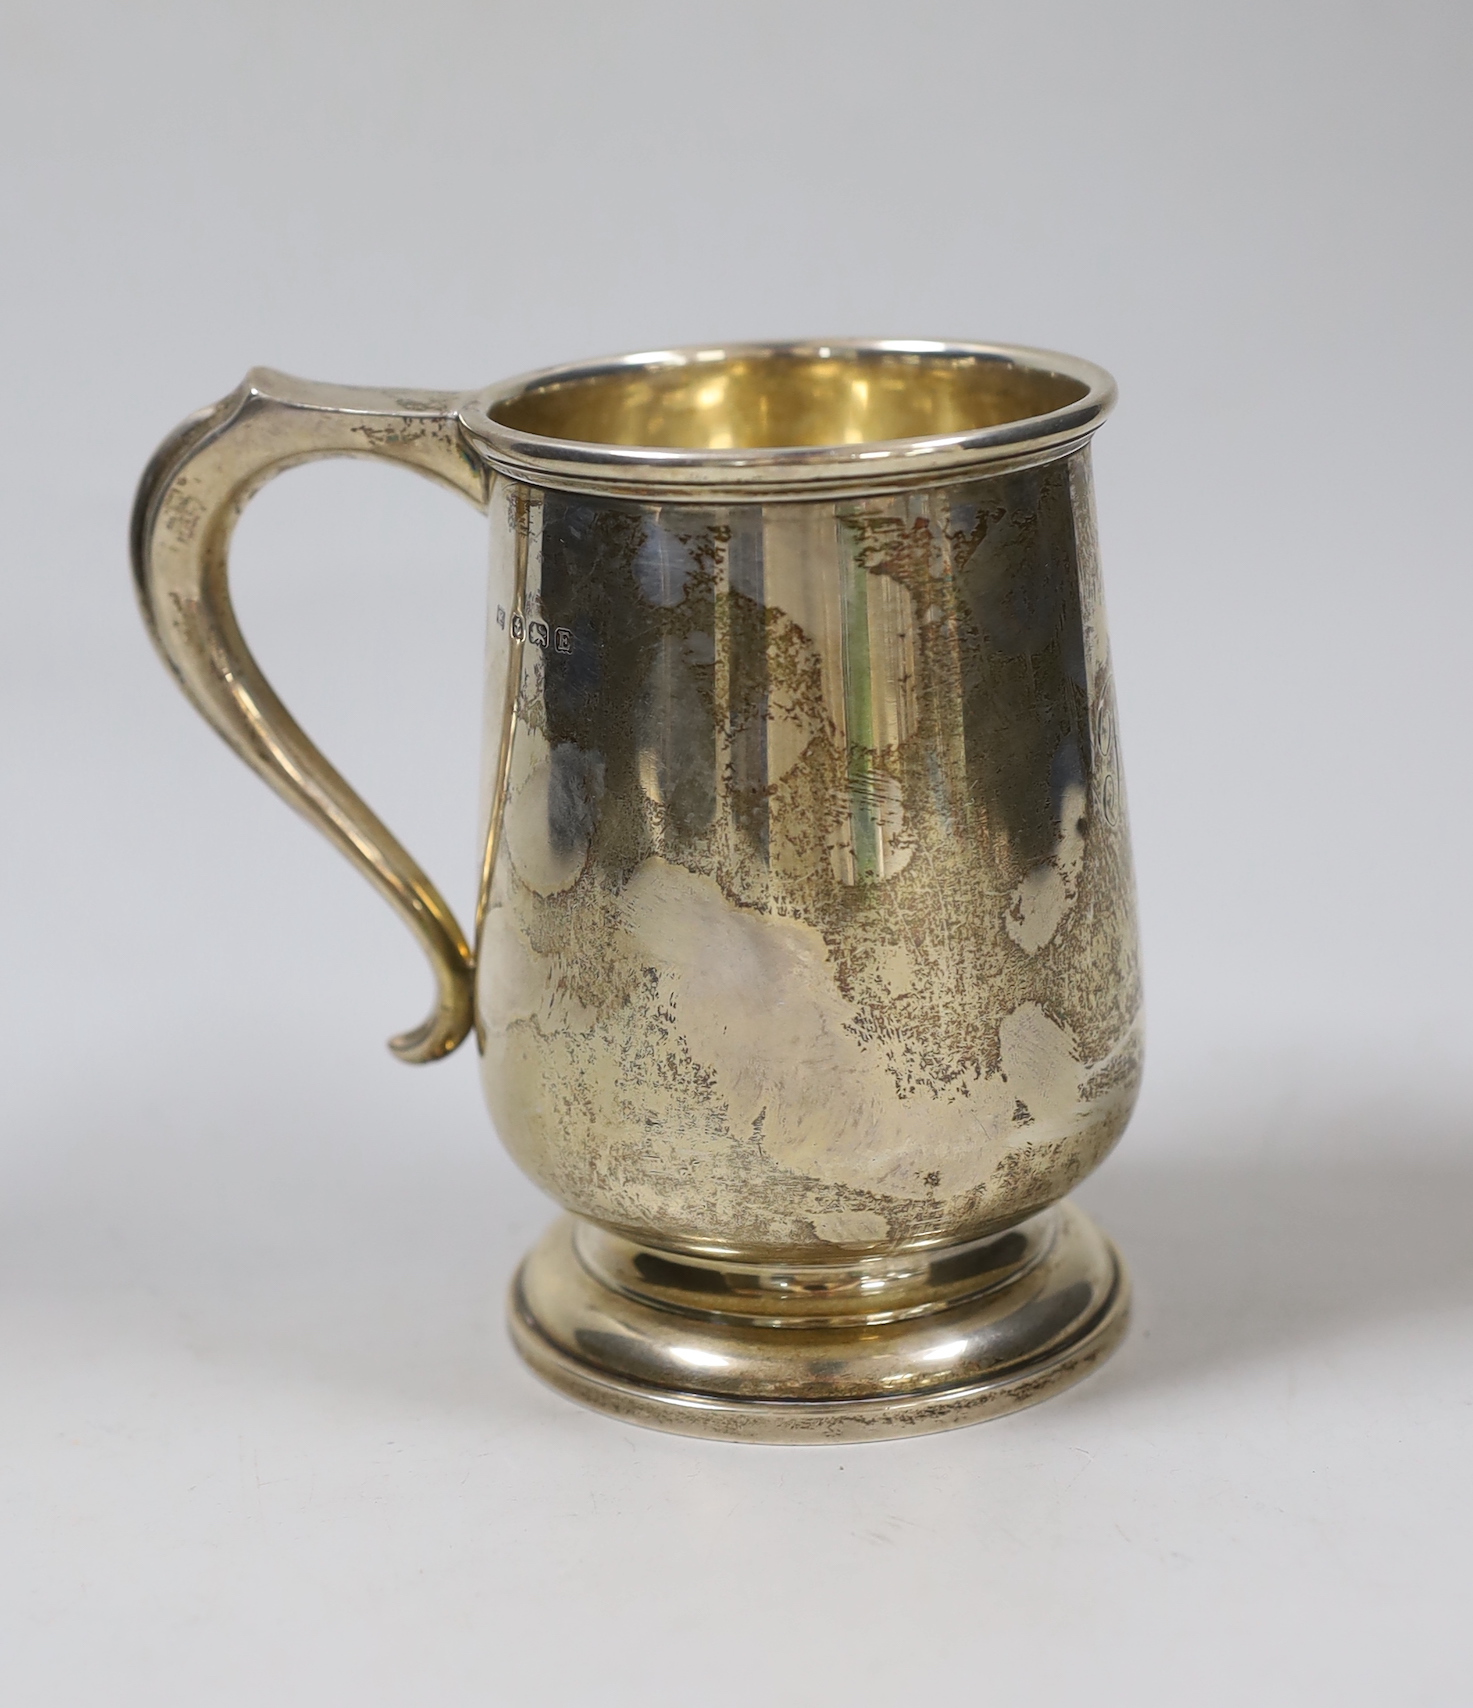 A George V silver tankard, A & J Zimmerman, Birmingham, 1929, height 12.5cm, 9.6oz., NB: From the Estate of Rt Hon Lord Lawson of Blaby                                                                                     